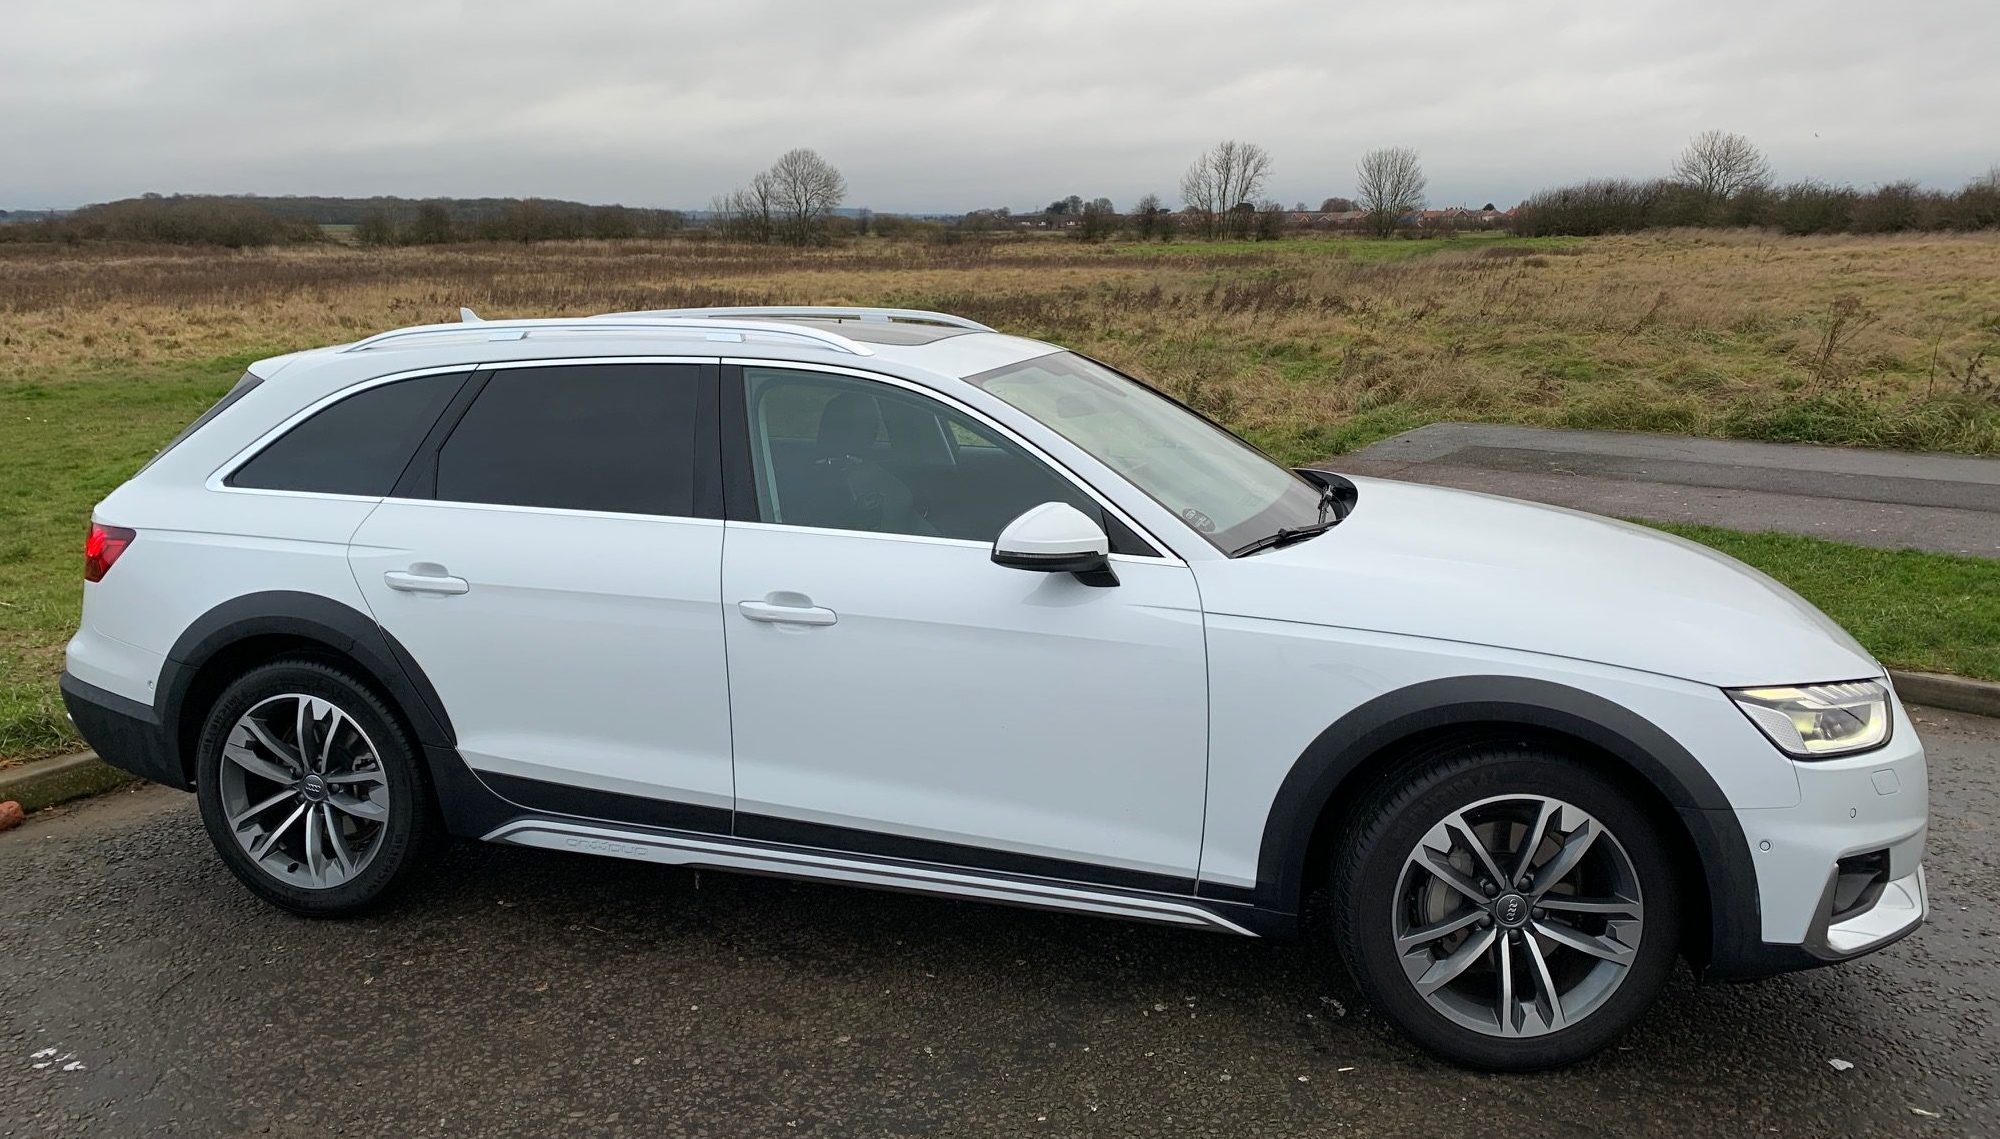 Audi A4 allroad 40 TDI quattro road test and review